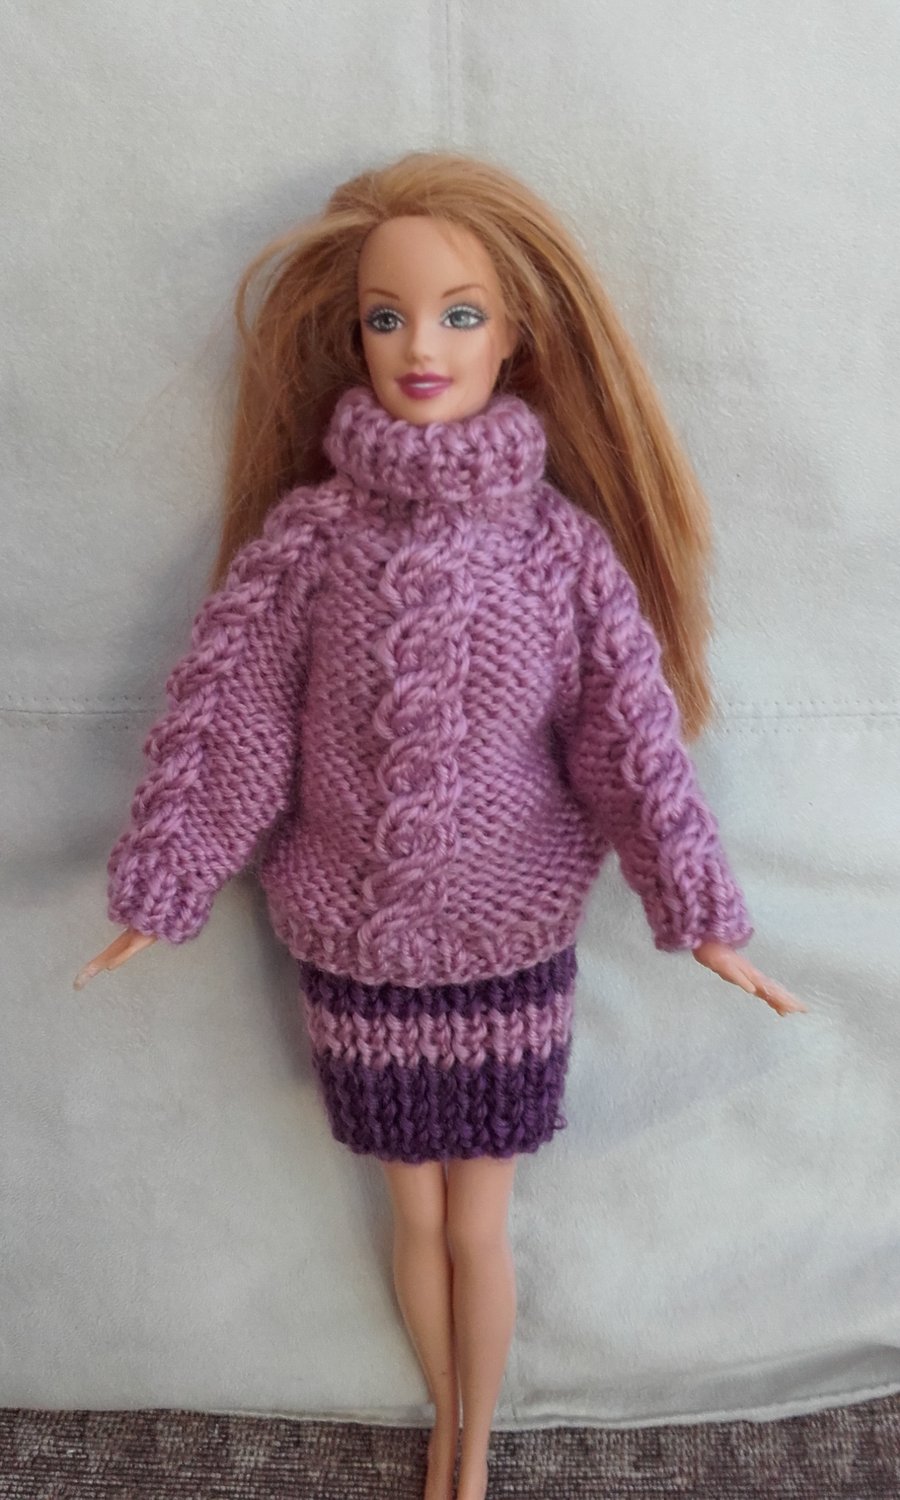 Knitted outfit for Barbie style doll